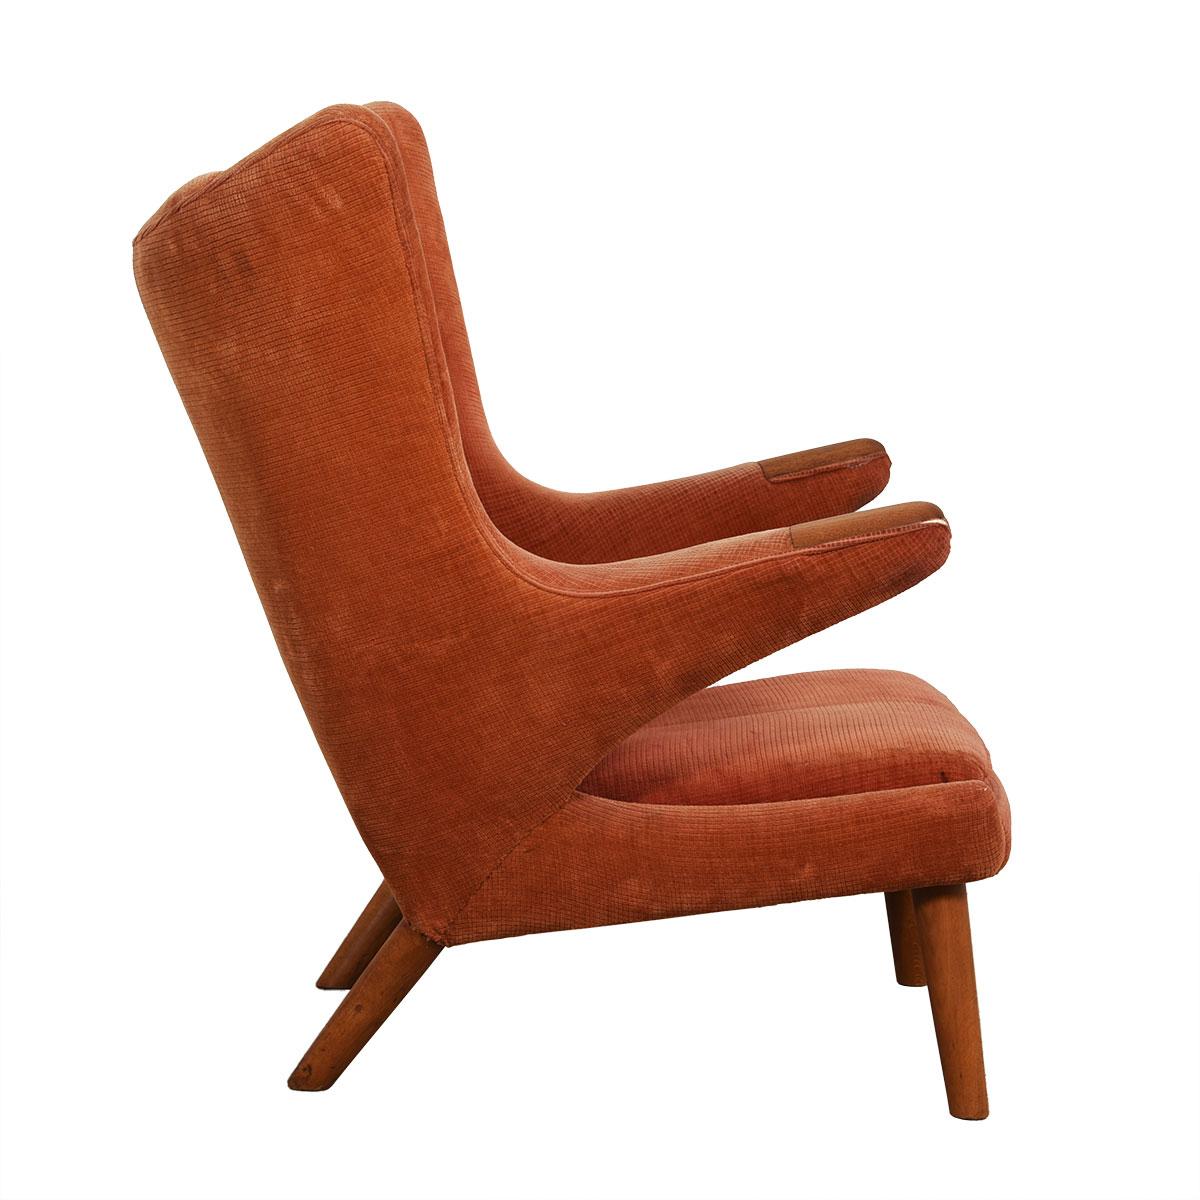 Iconic Papa Bear Wingback Chair by Hans Wegner, 1951

Additional information:
Material: Upholstery, Oak, Teak
We are pleased to offer this true icon of Danish design, the incredibly comfortable Model AP19 wingback chair by Hans Wagner, more